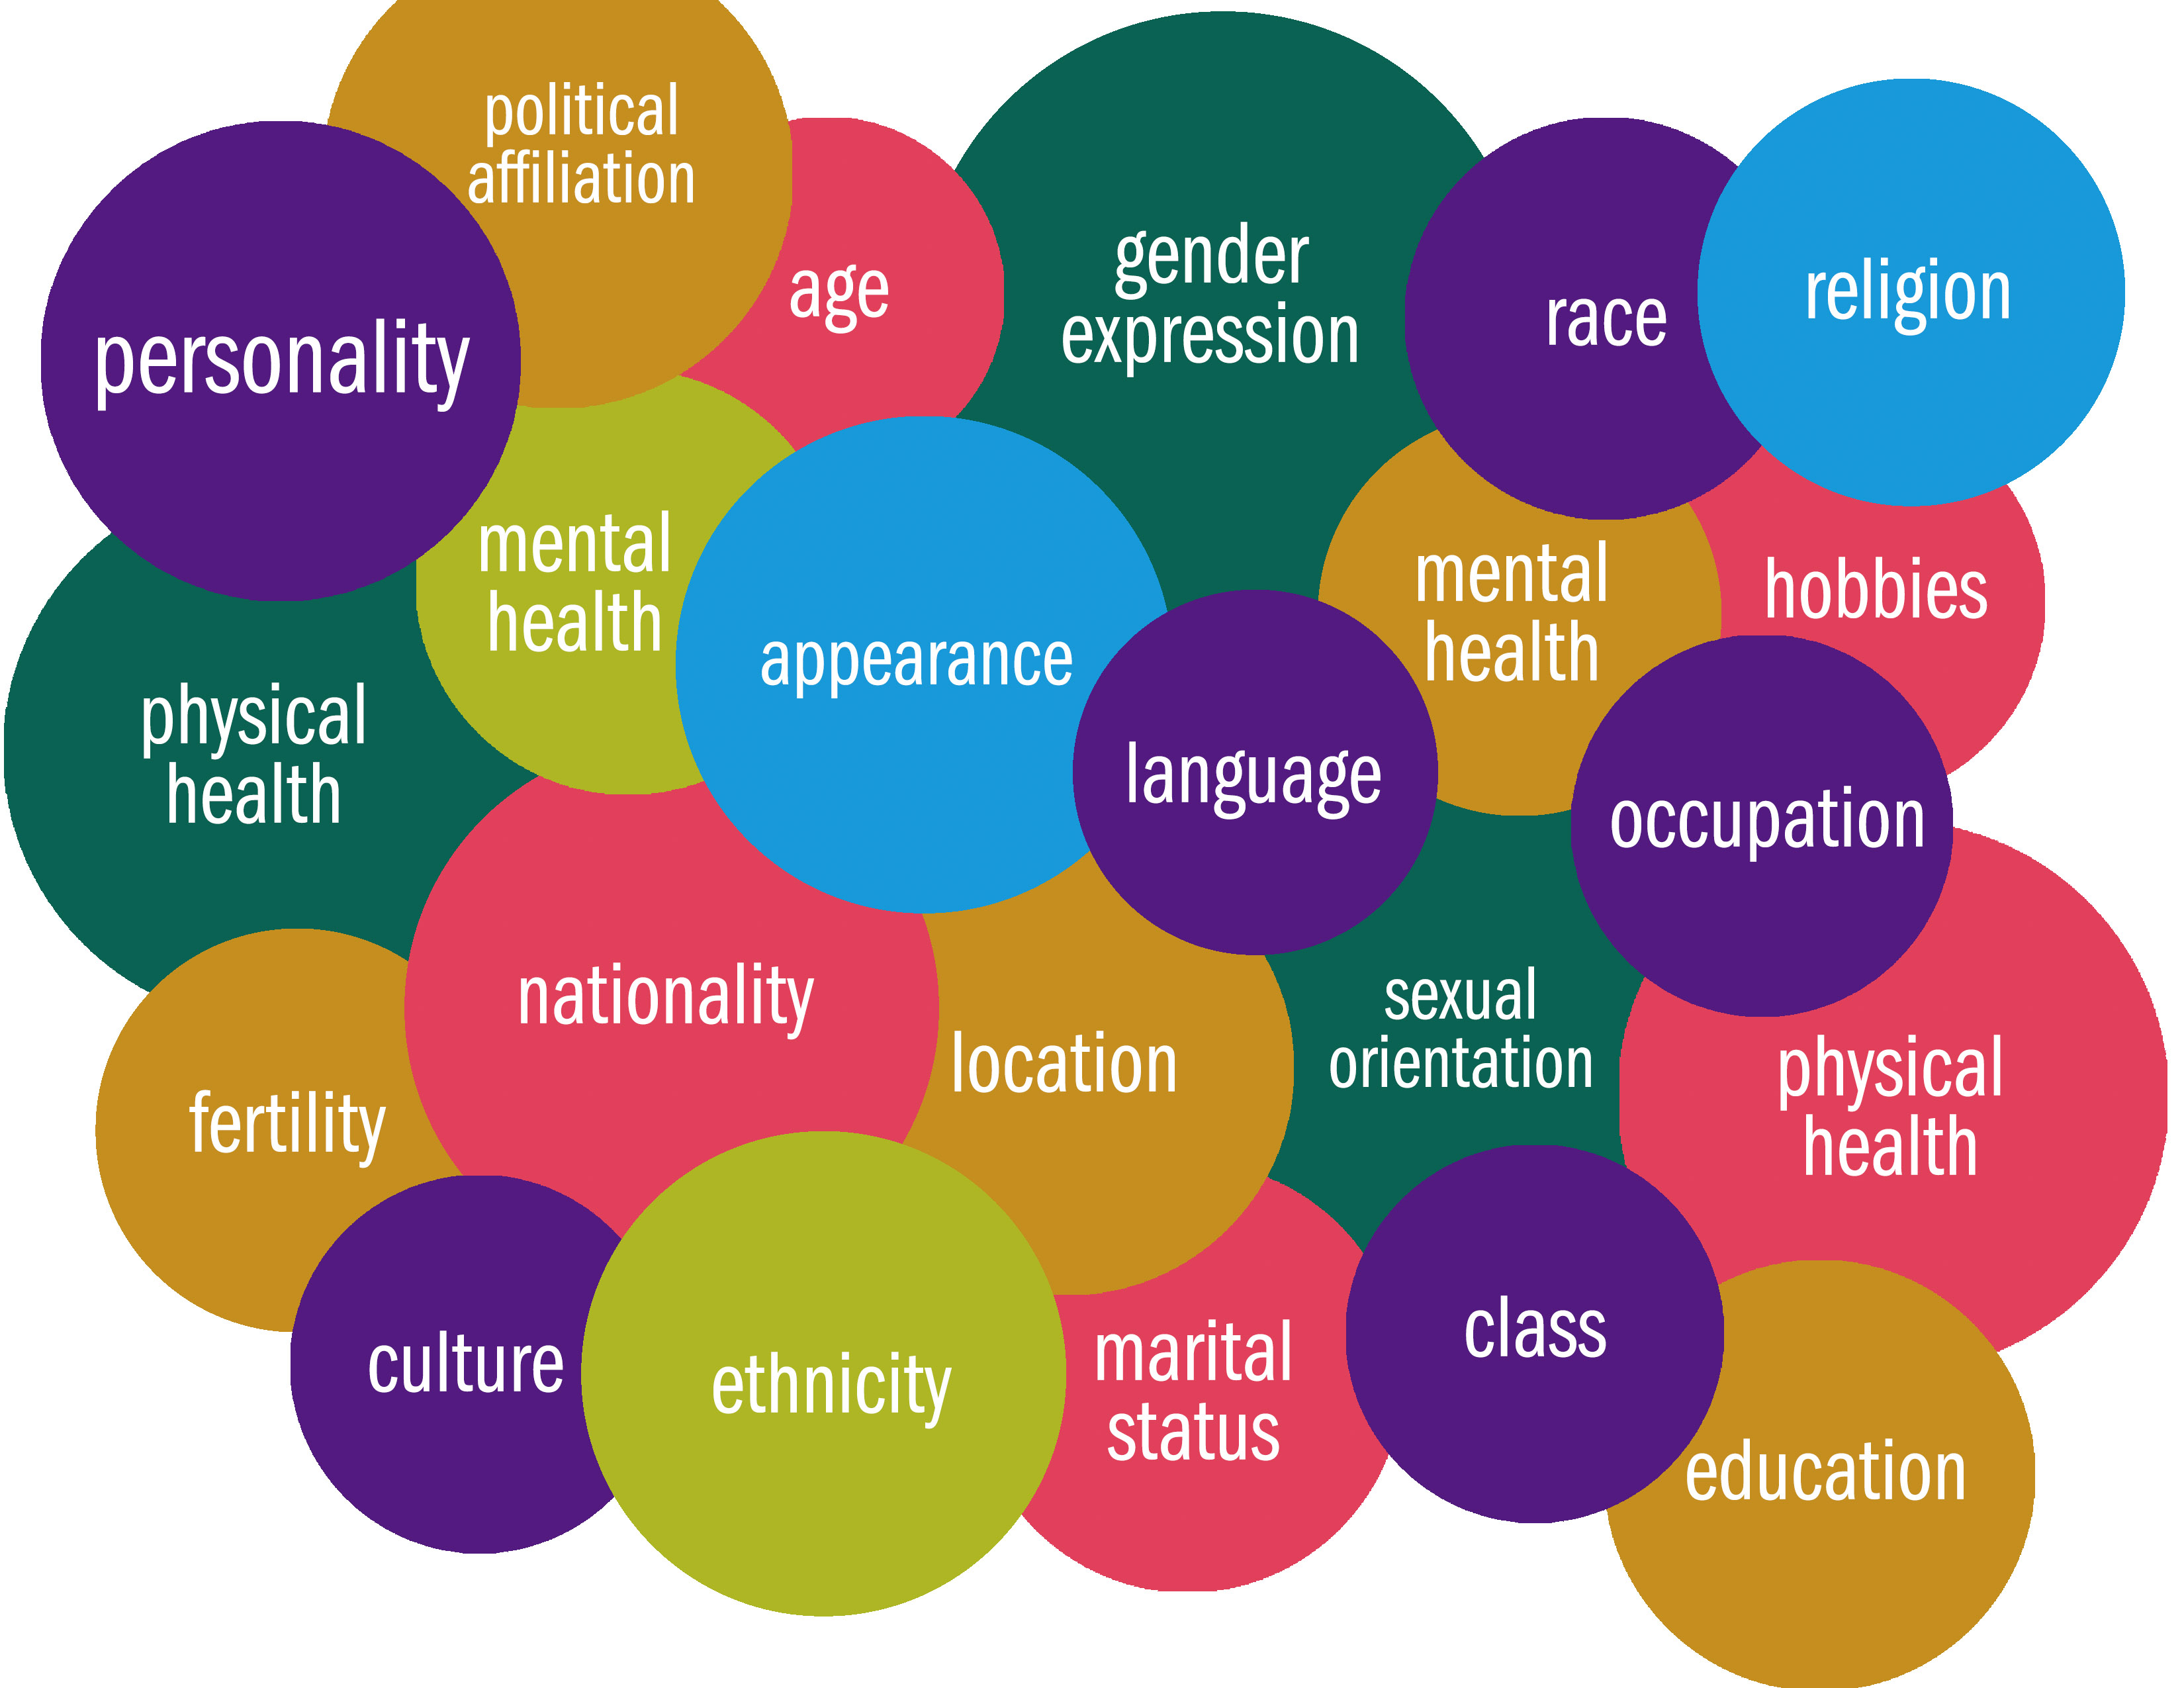 A collage of overlapping bubbles with social identity aspects like: personality, mental health, age, nationality, location, religion, race, physical health, fertility